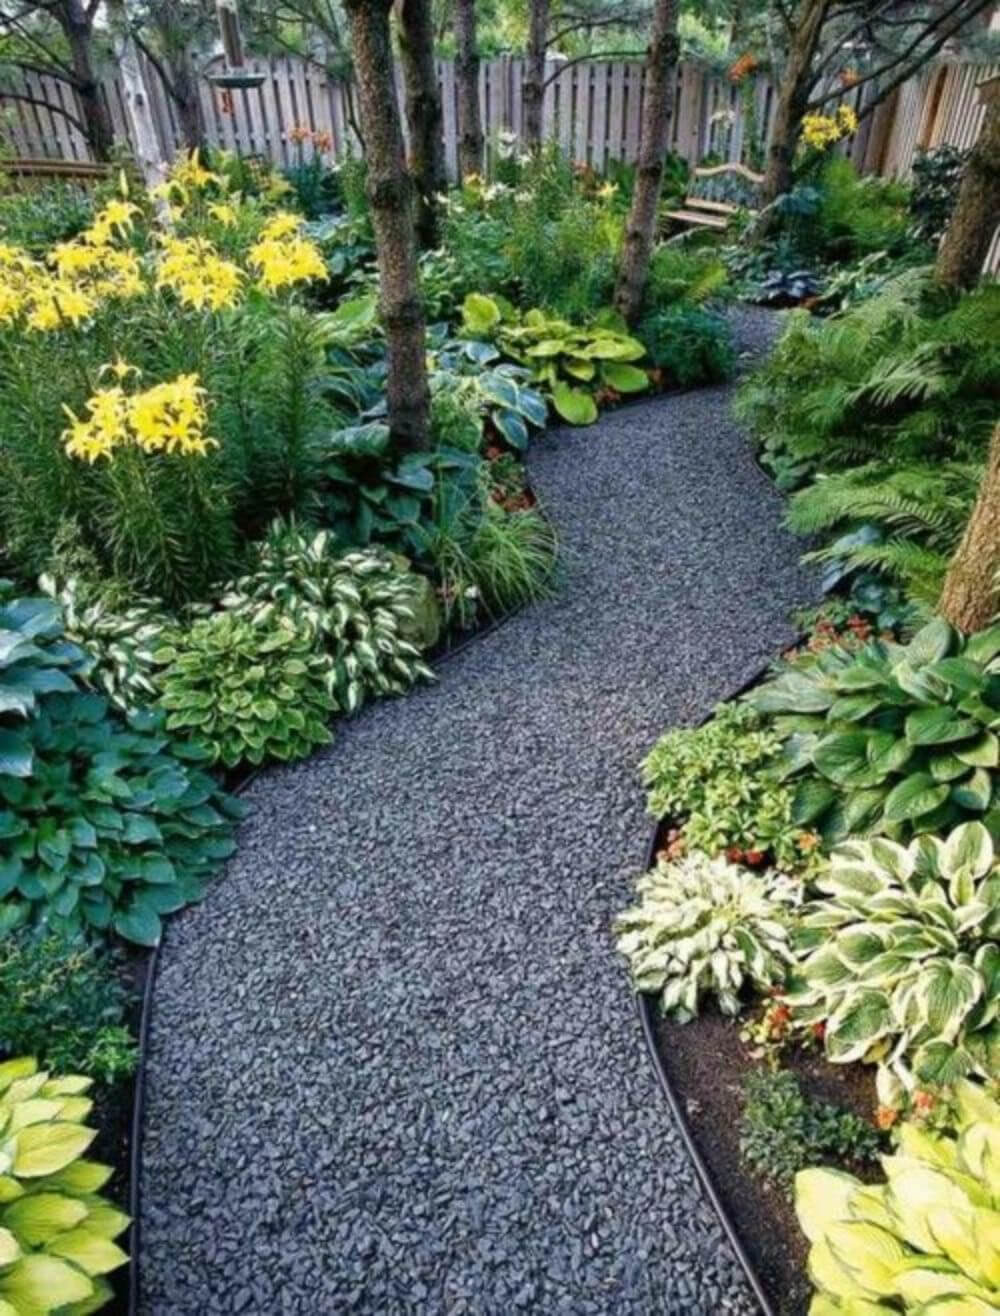 44+ Ideas For Landscape the Yard Without Grass | Alternatives to the Manicured Lawn | FarmFoodFamily.com